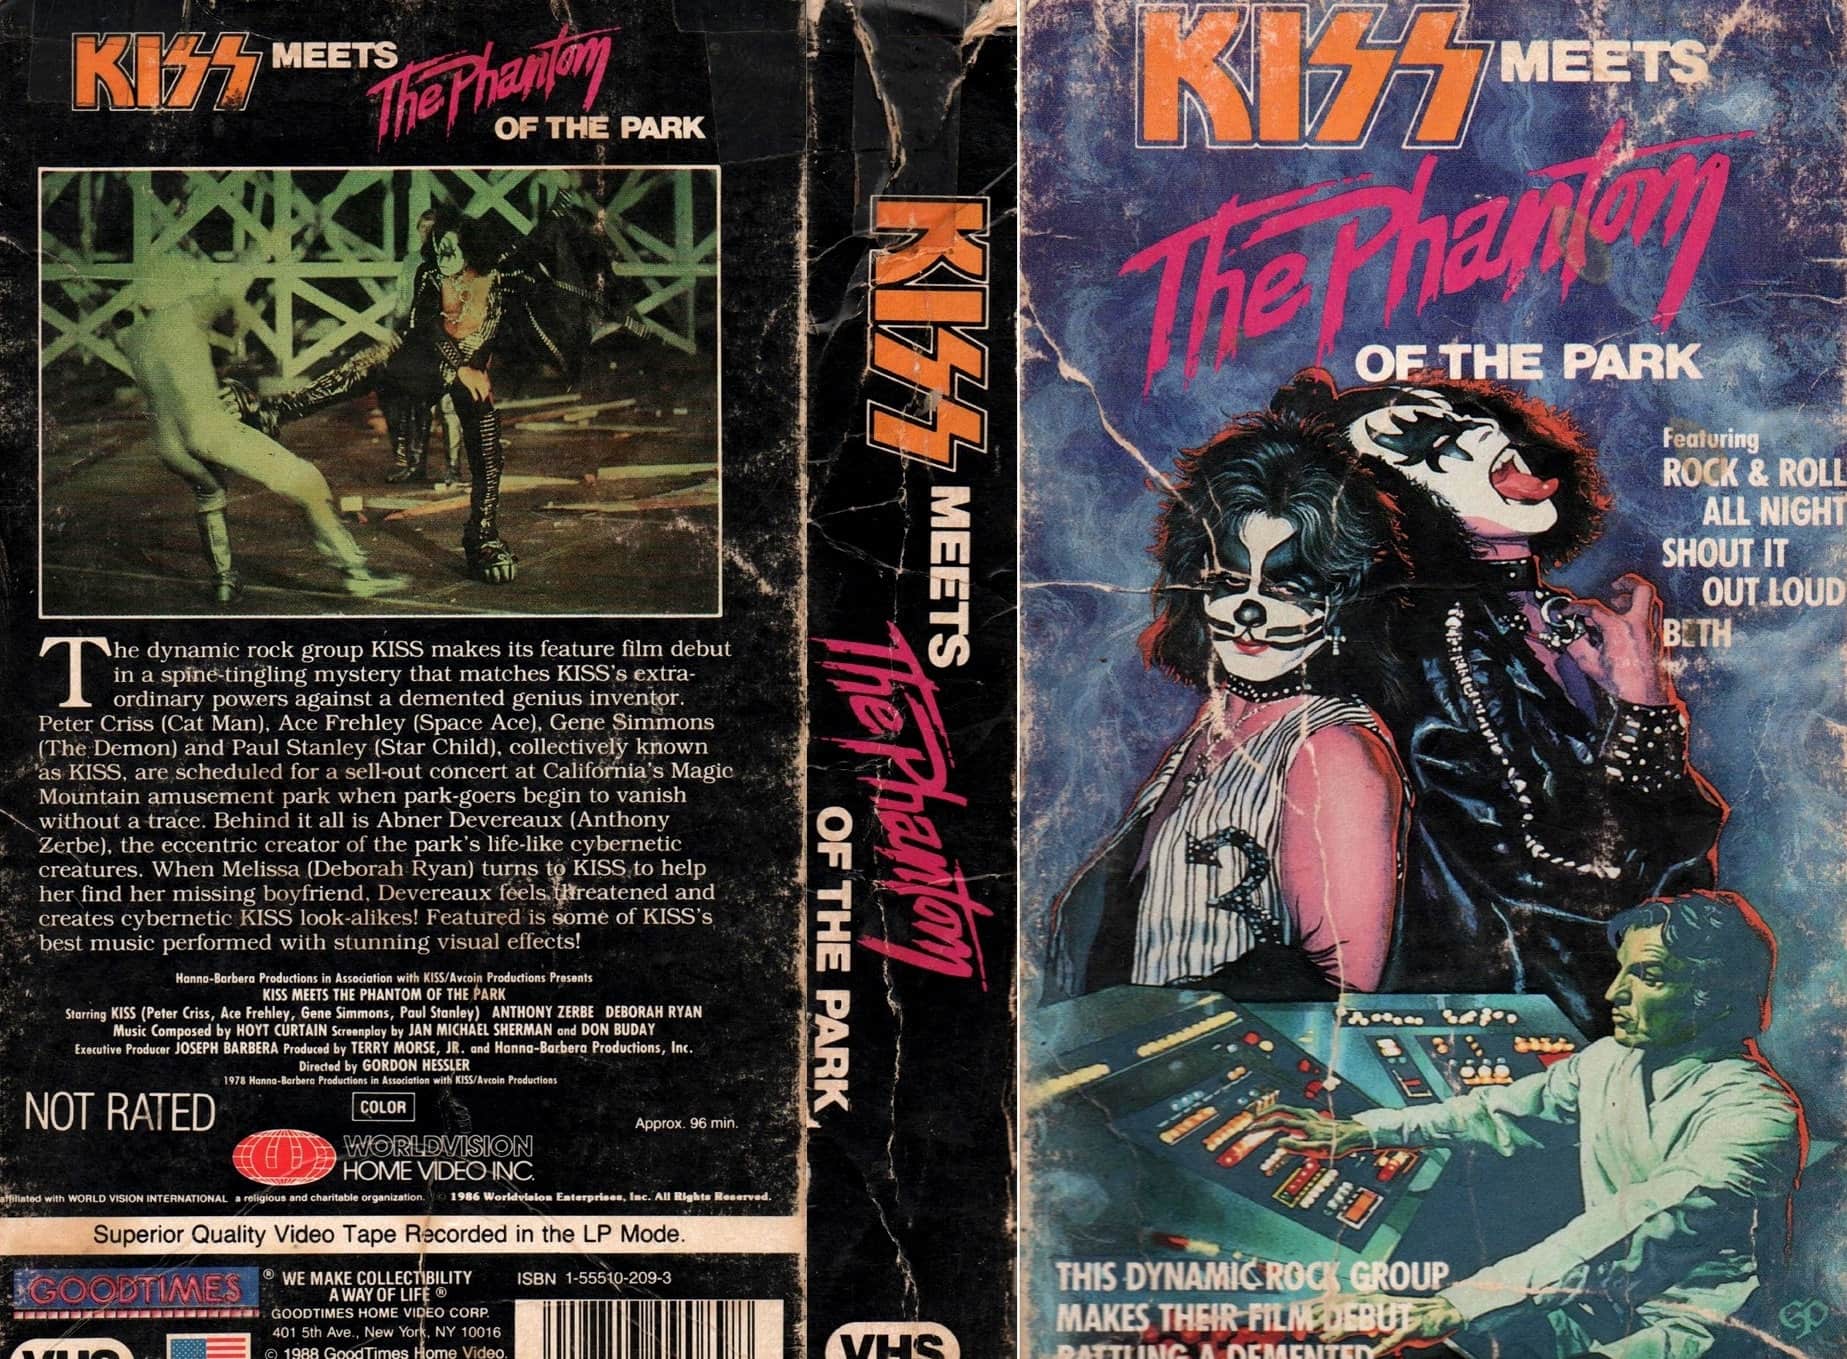 Kiss aired their film "Kiss Meets the Phantom of the Park", 1978